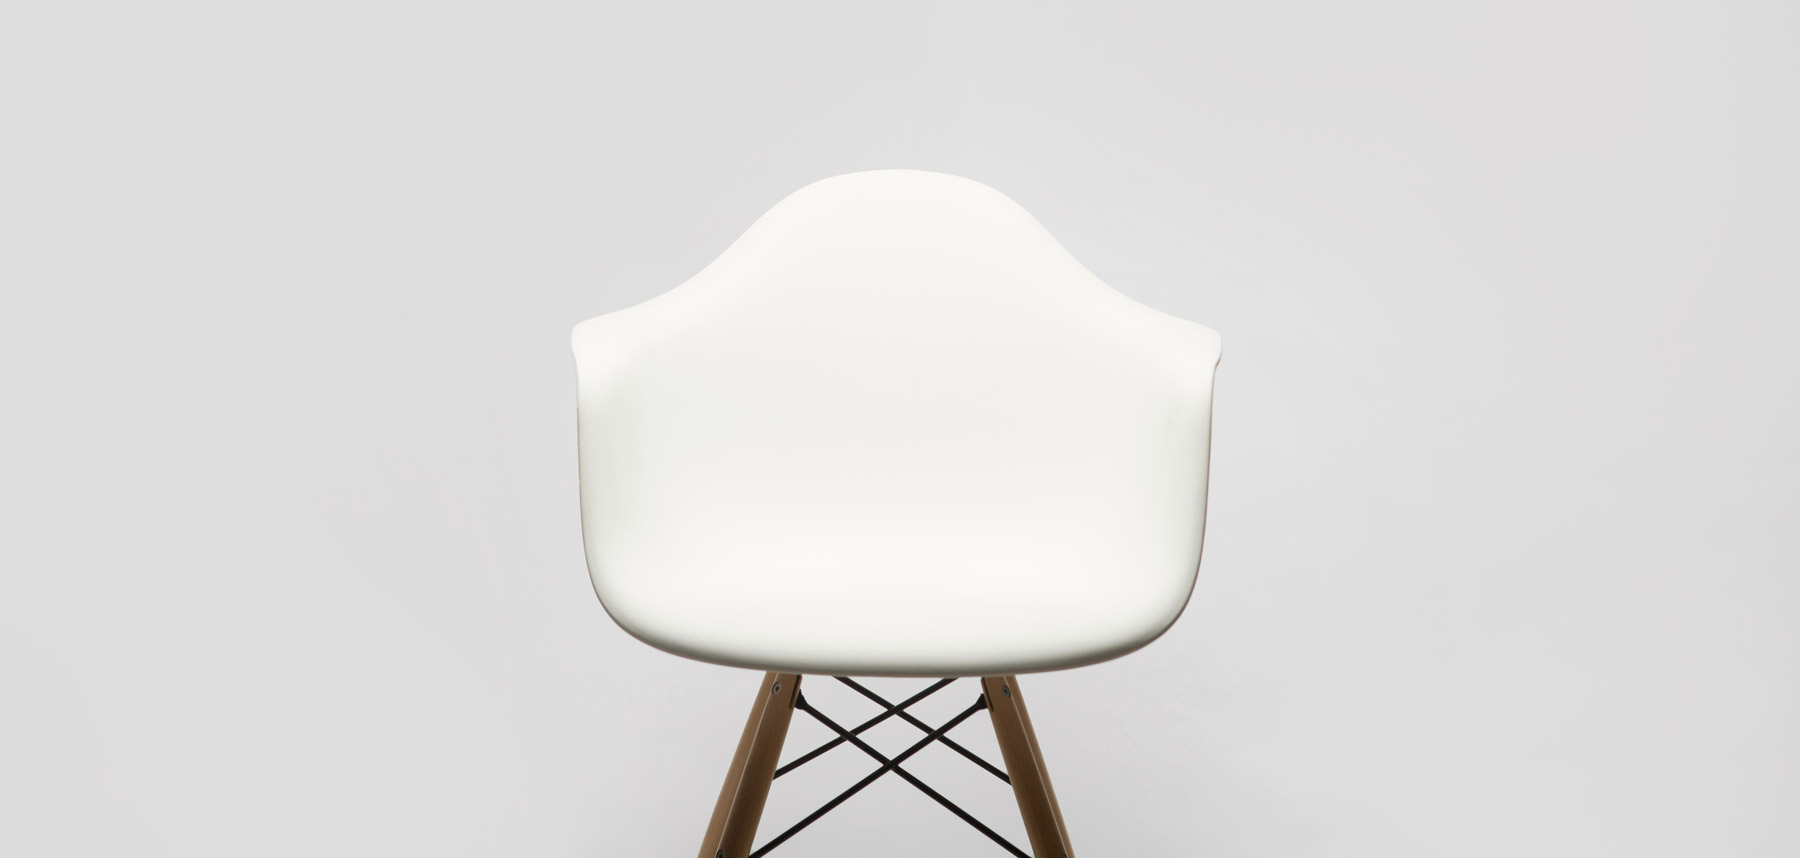 Chair design by Charles & Ray Eames. Do you think this design is timeless? Photography by Dillon Mangums via Unsplash